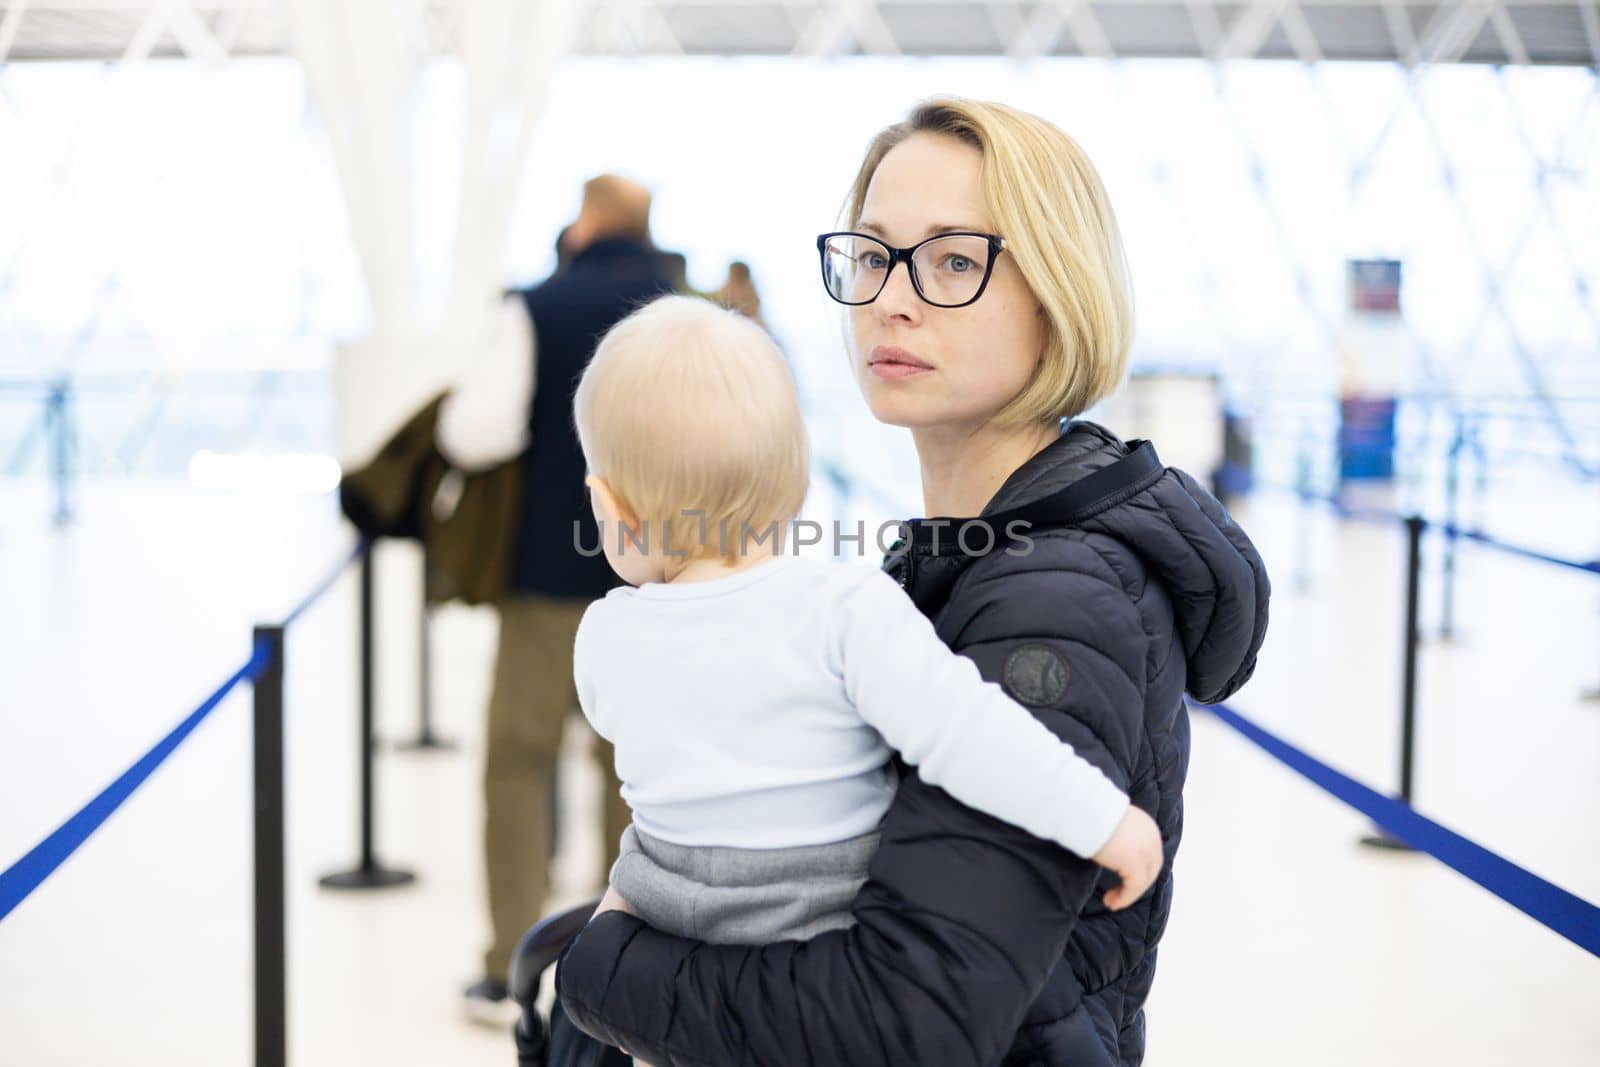 Mother carying his infant baby boy child queuing at airport terminal in passport control line at immigrations departure before moving to boarding gates to board an airplane. Travel with baby concept. by kasto